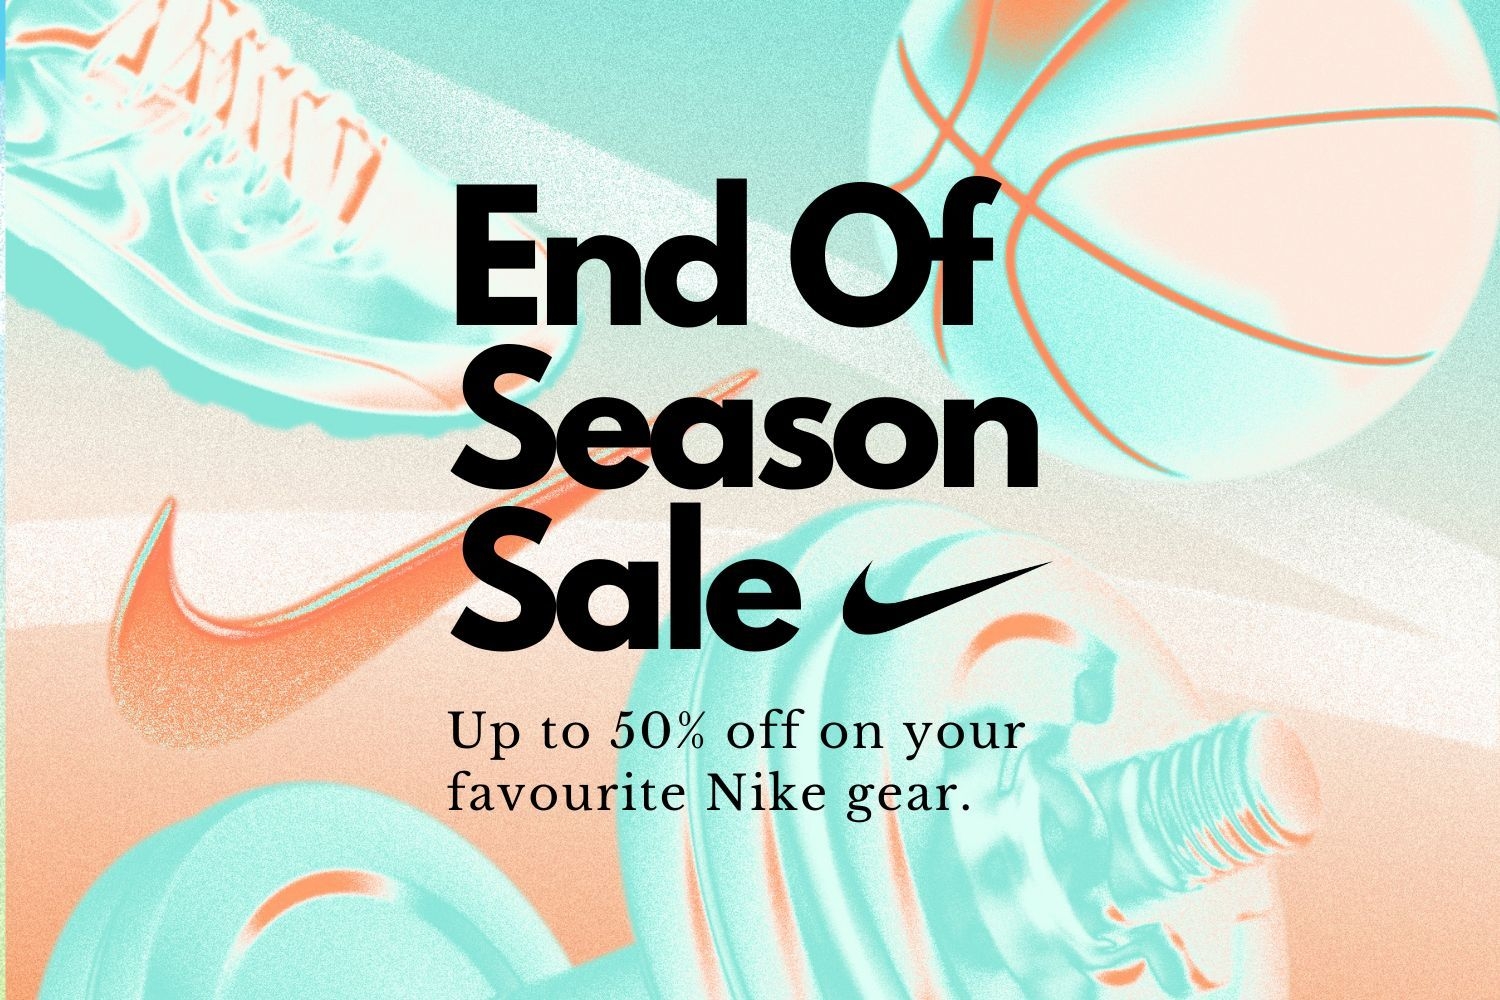 Nike presents high discounts in their End of Season sale